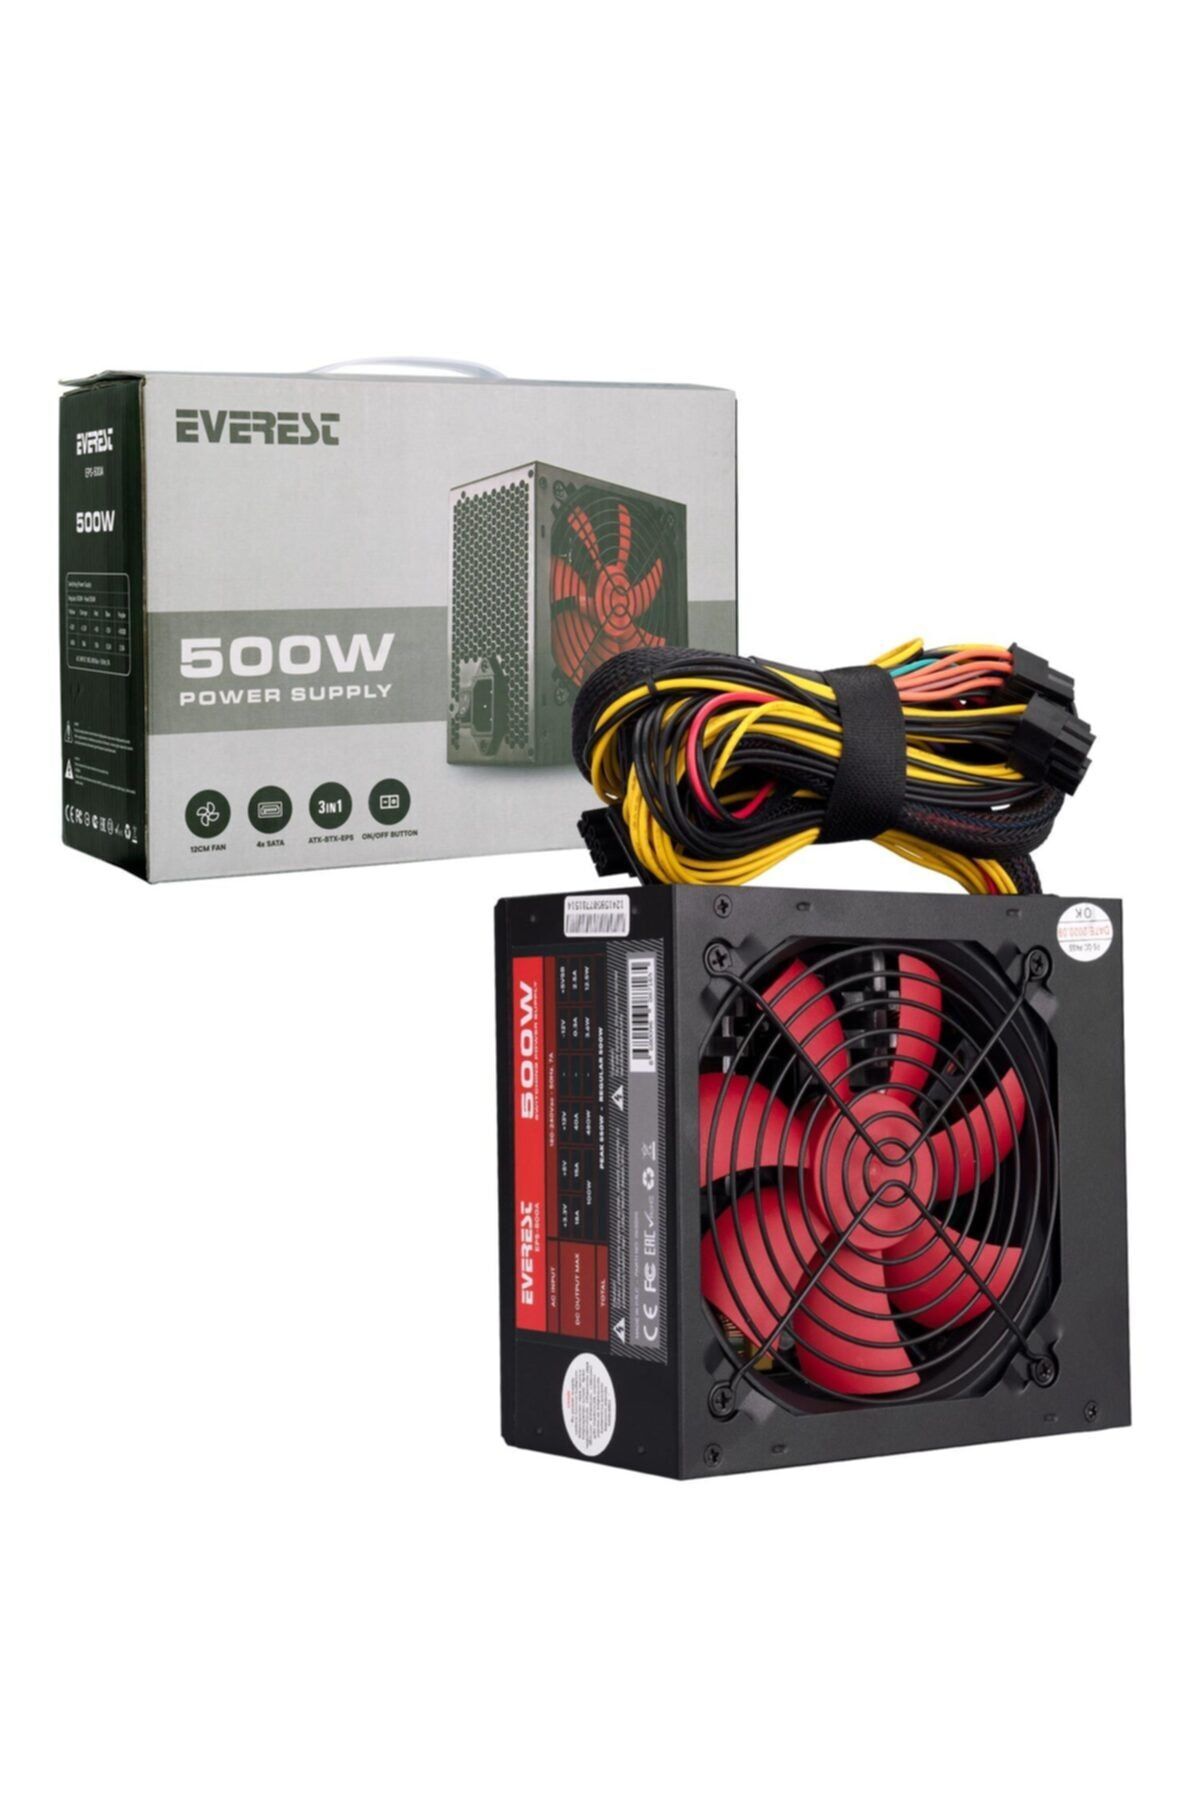 Everest Power Supply 500w Eps-500a